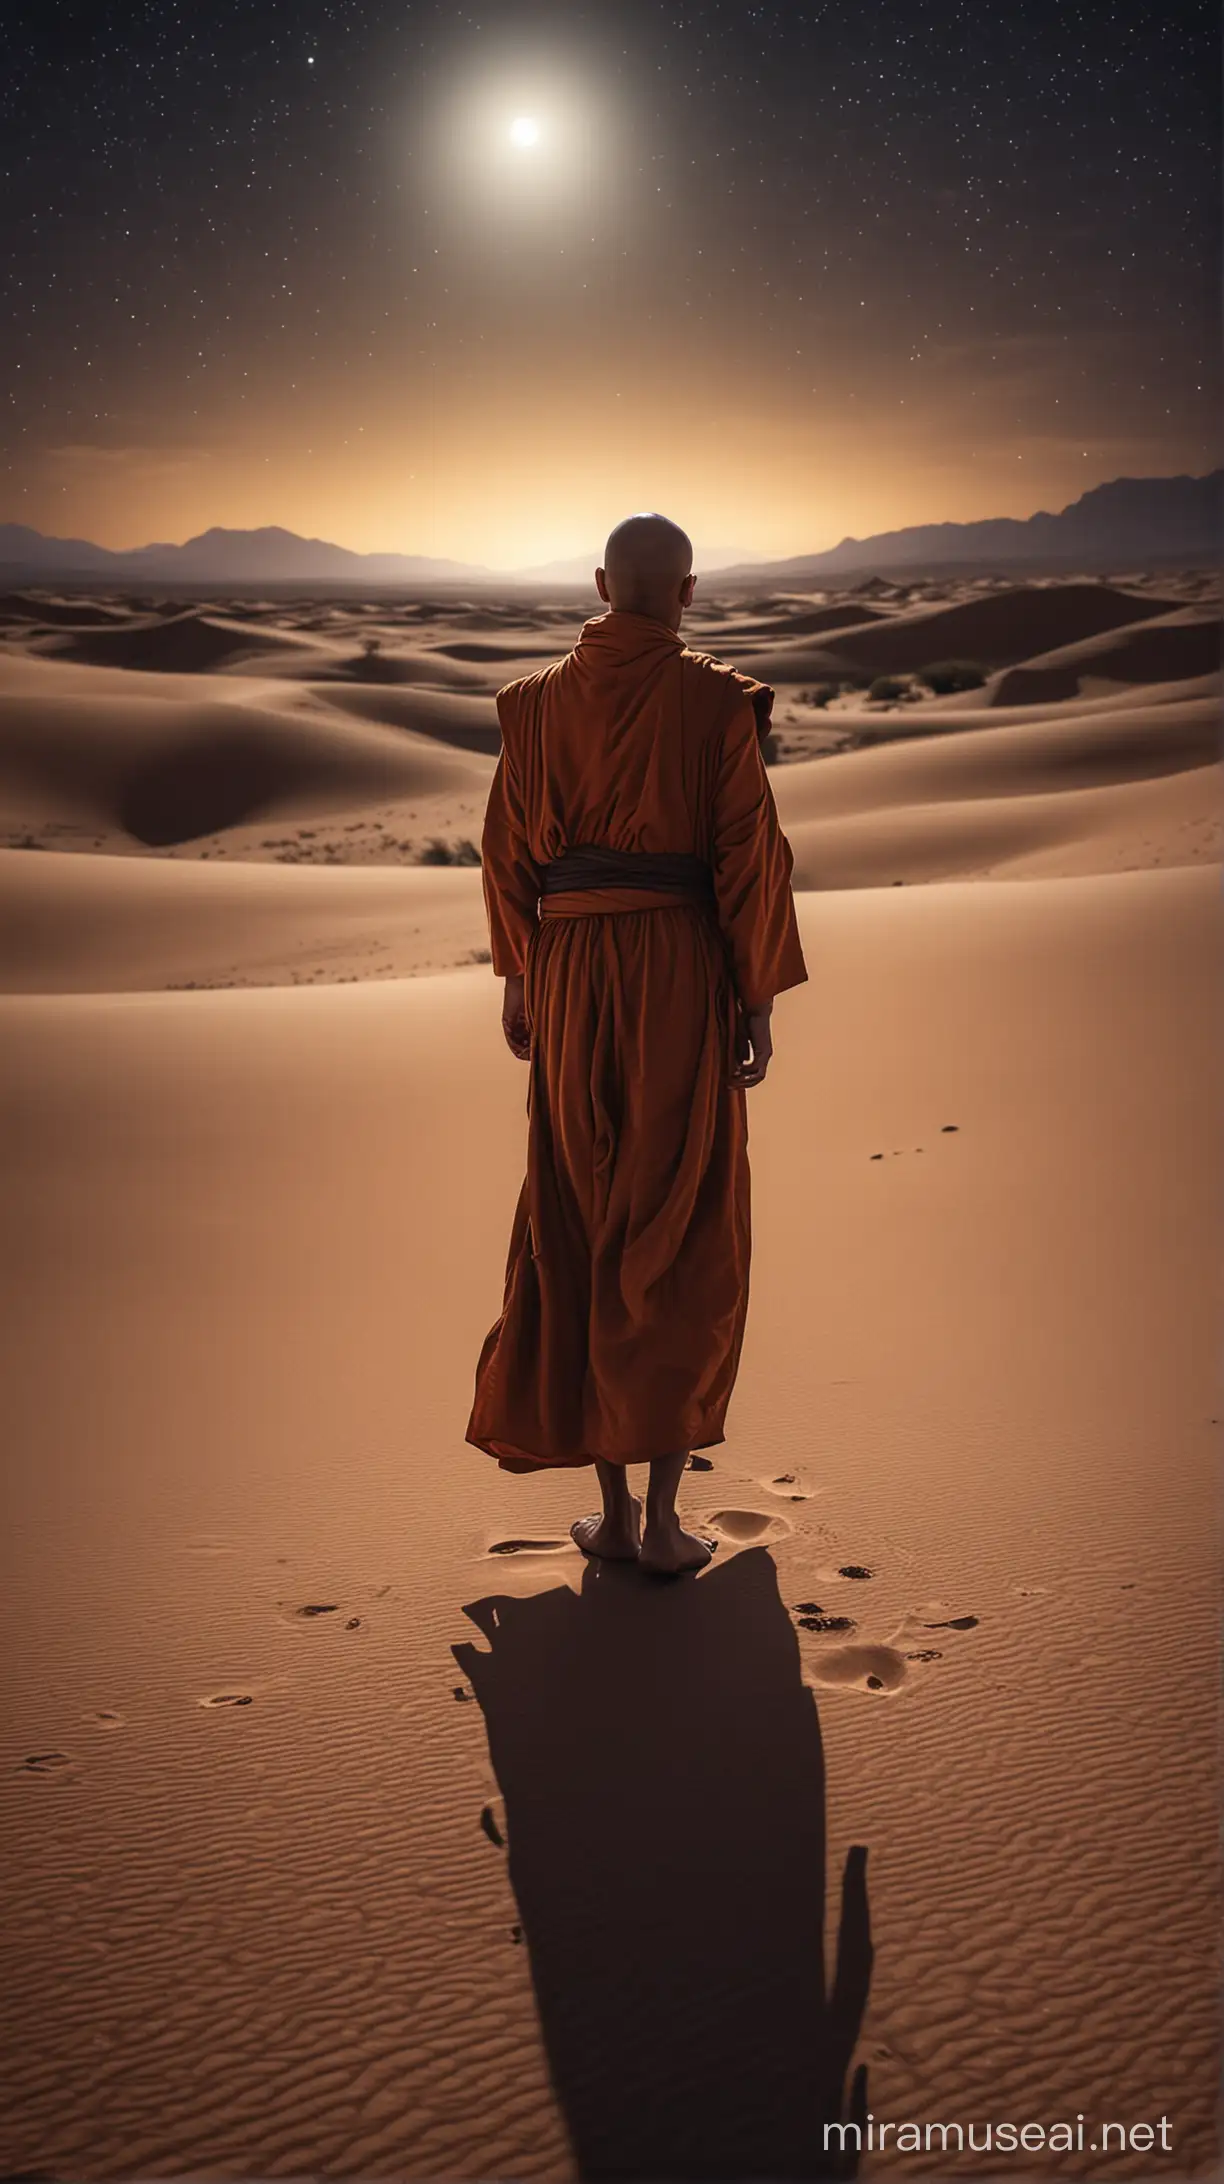 A night in the desert a Monk is walking alone in the desert 